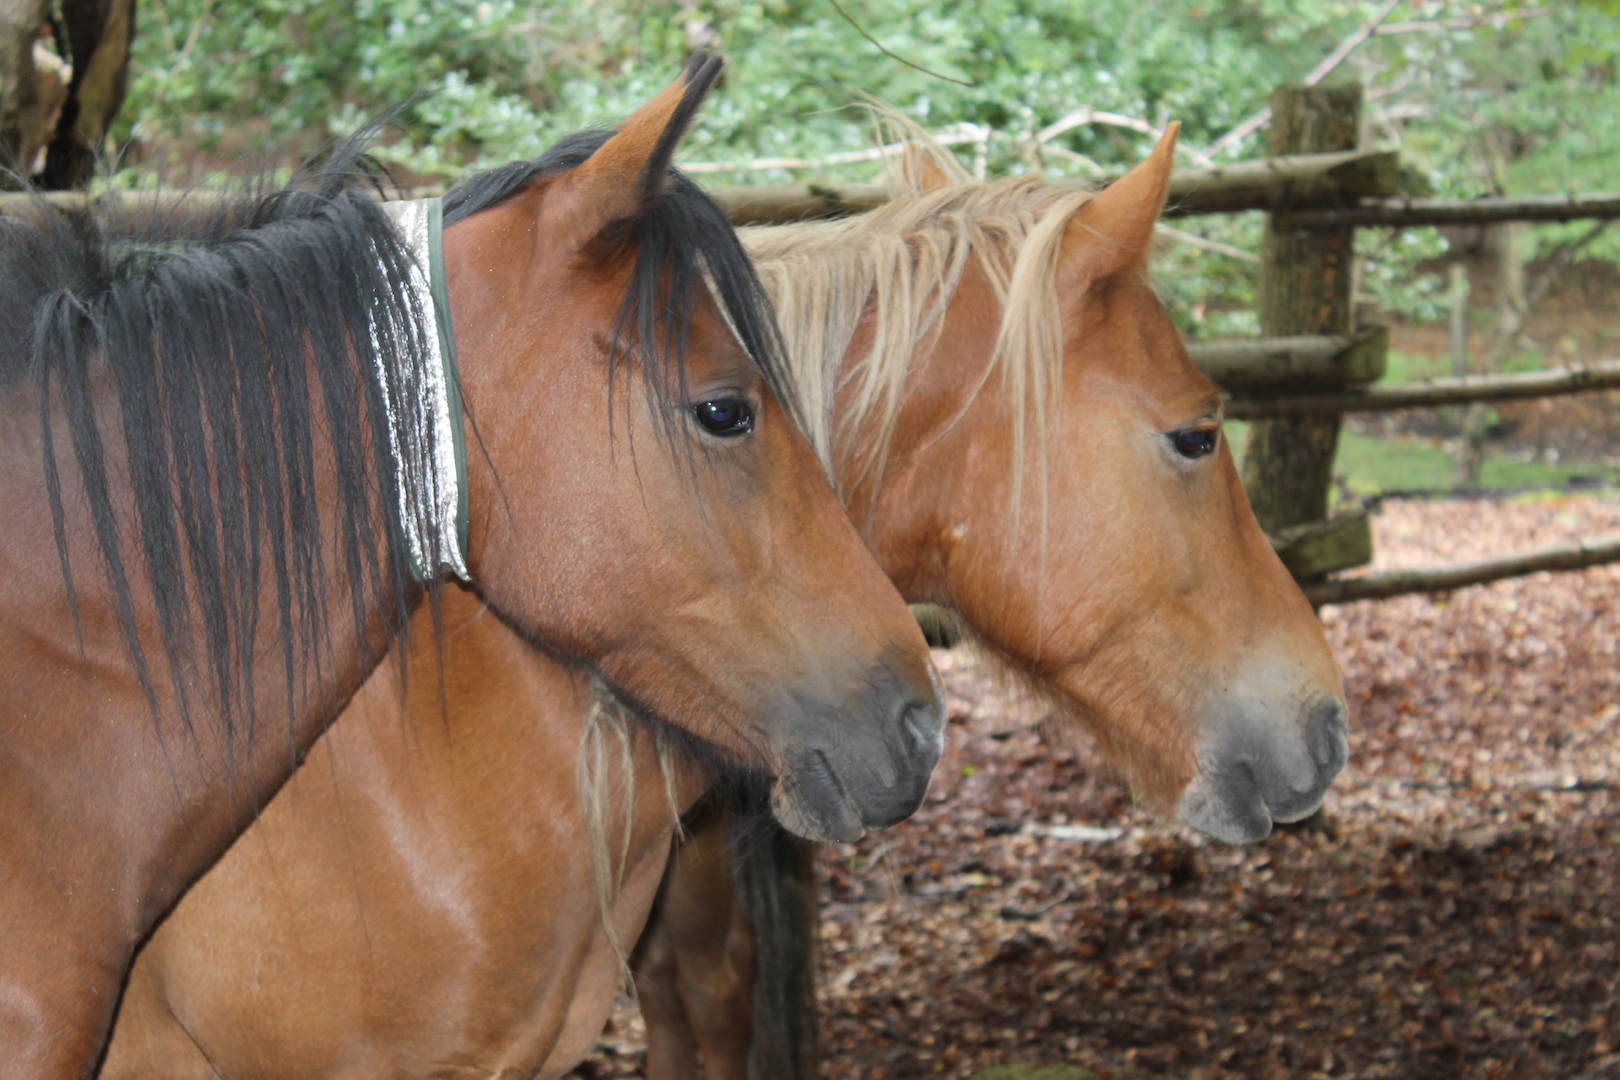 The reflective collars enable the ponies to be visible at night.